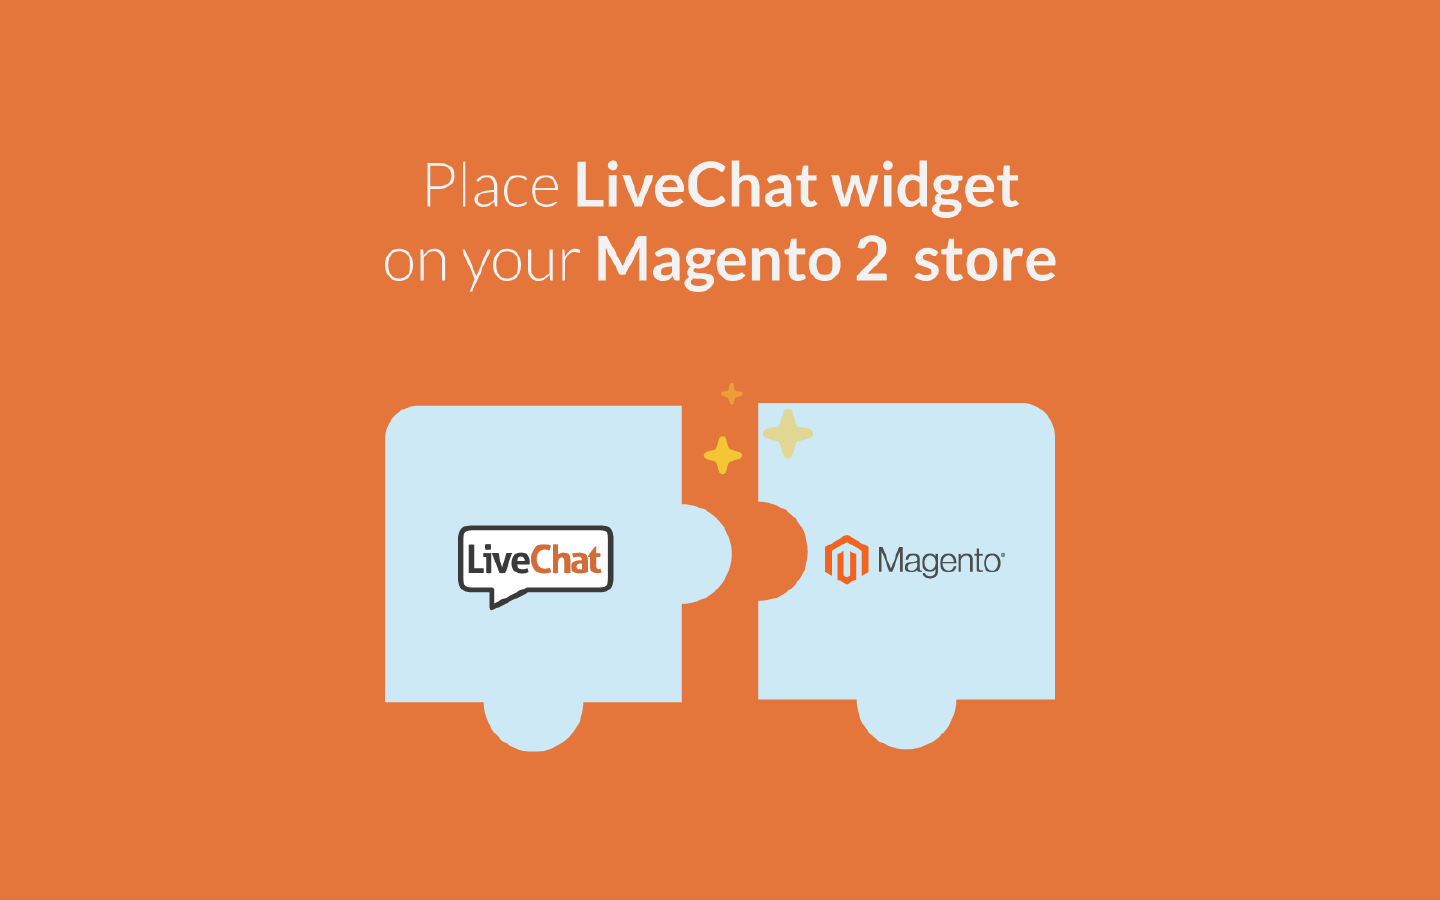 LiveChat integrates with Magento v. 2